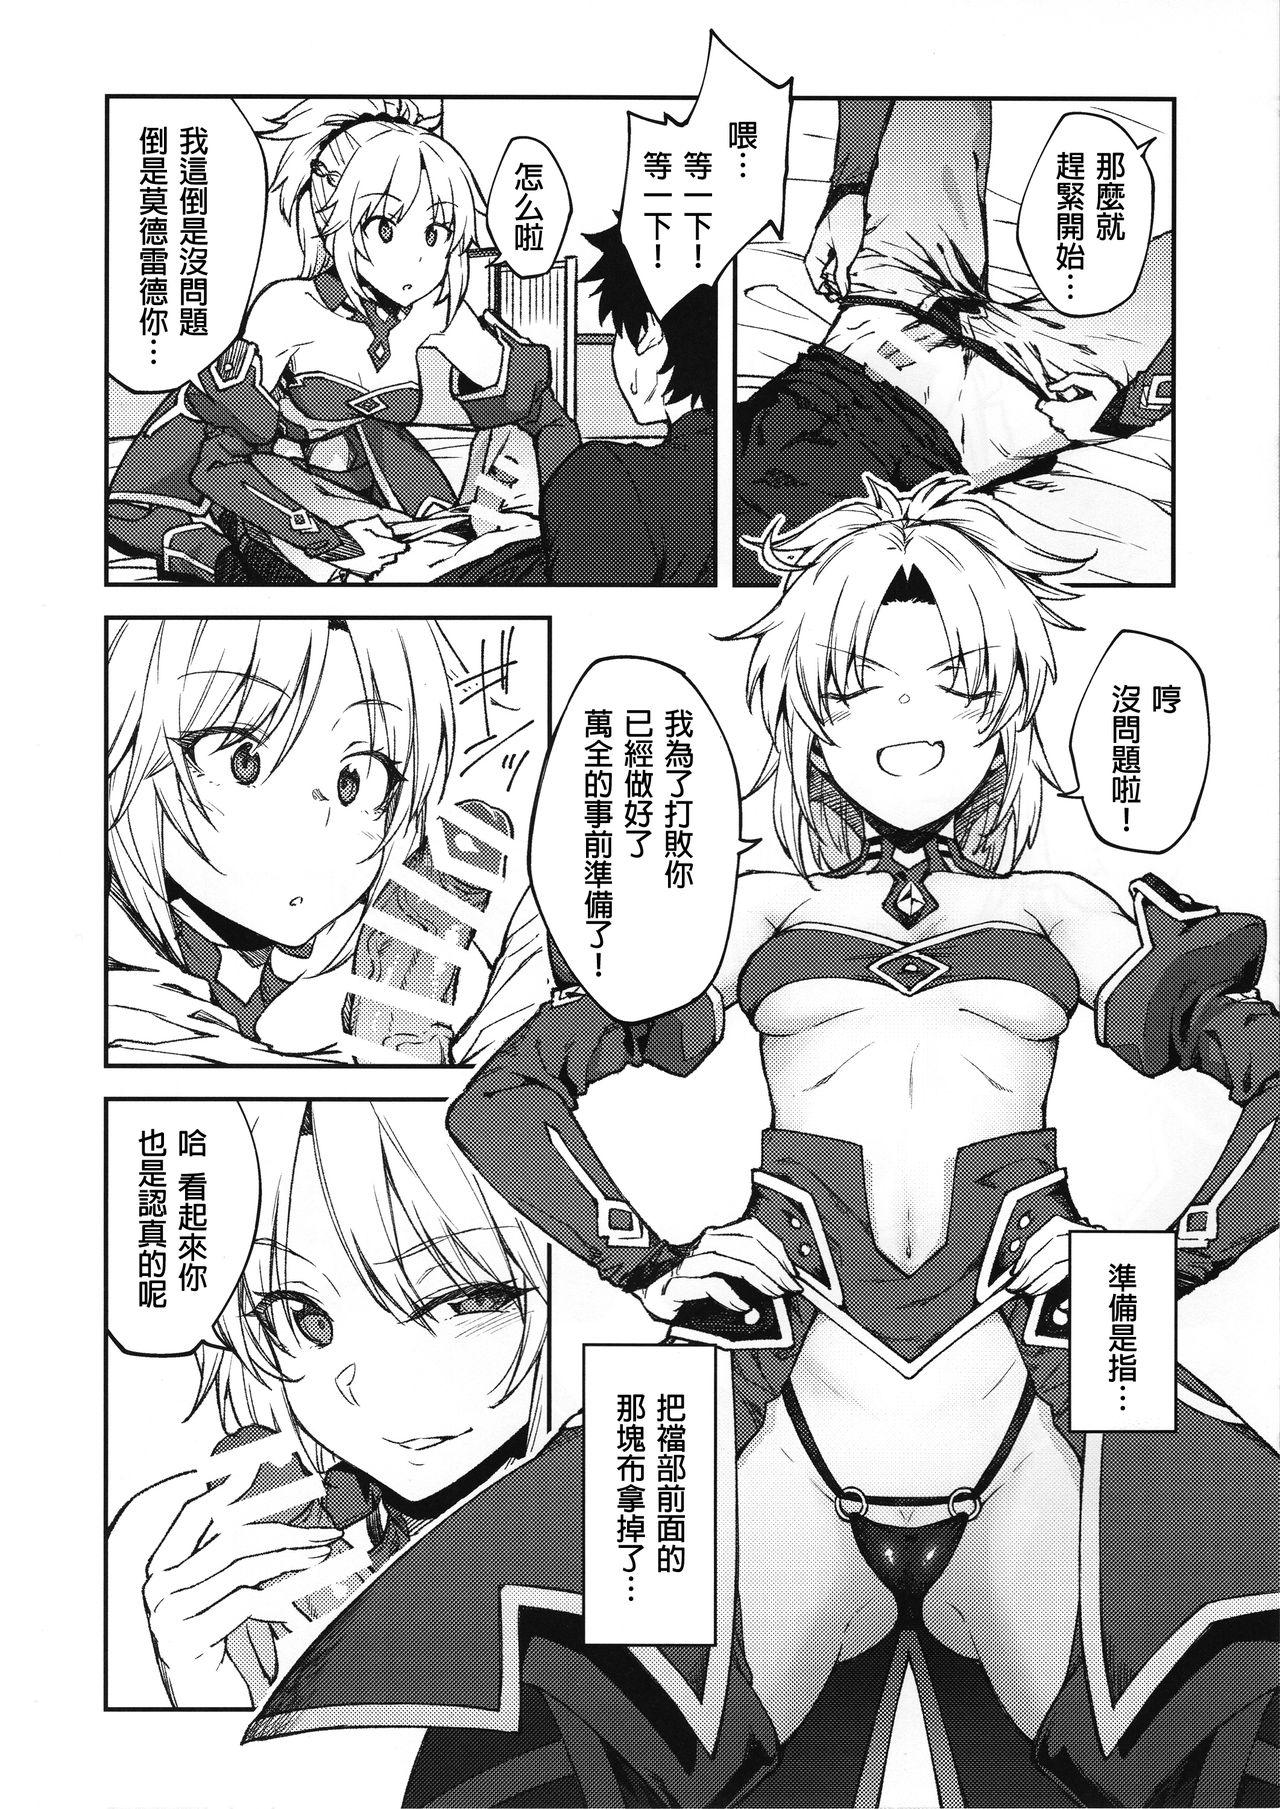 Tattoos Chaldea Life II - Fate grand order Phat Ass - Page 12